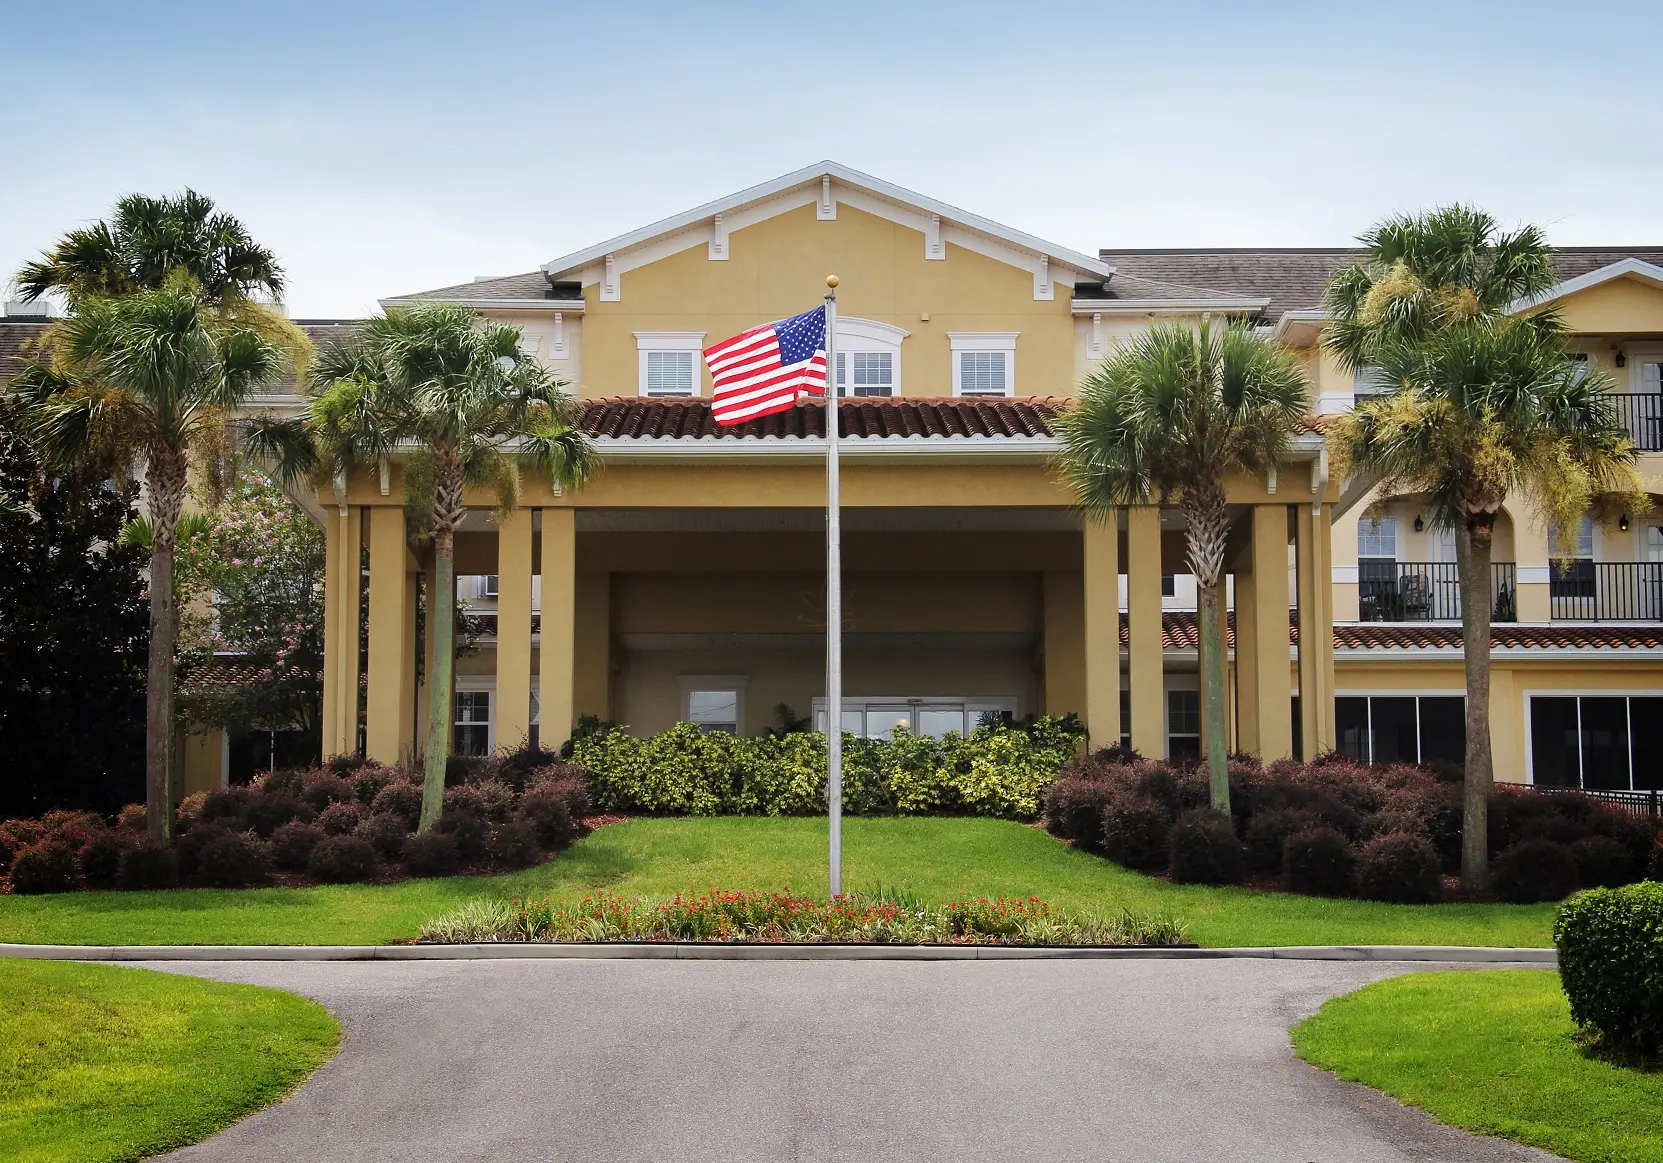 Front entrance to retirement home in Zephyrhills, Florida with USA flag in foreground.